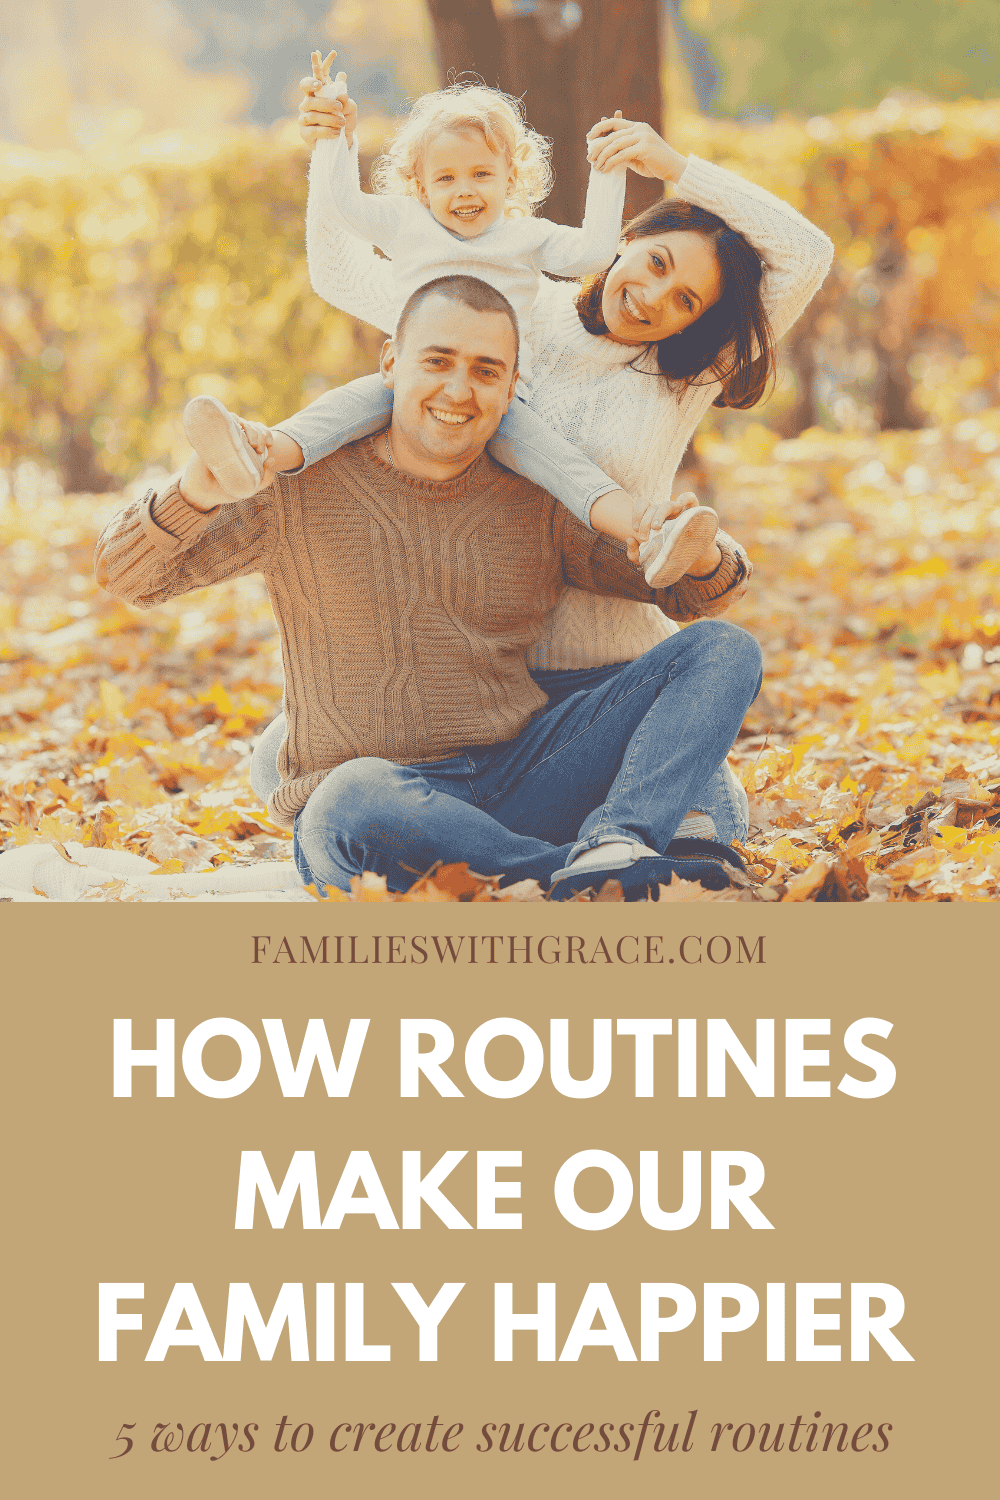 How routines make our family happier